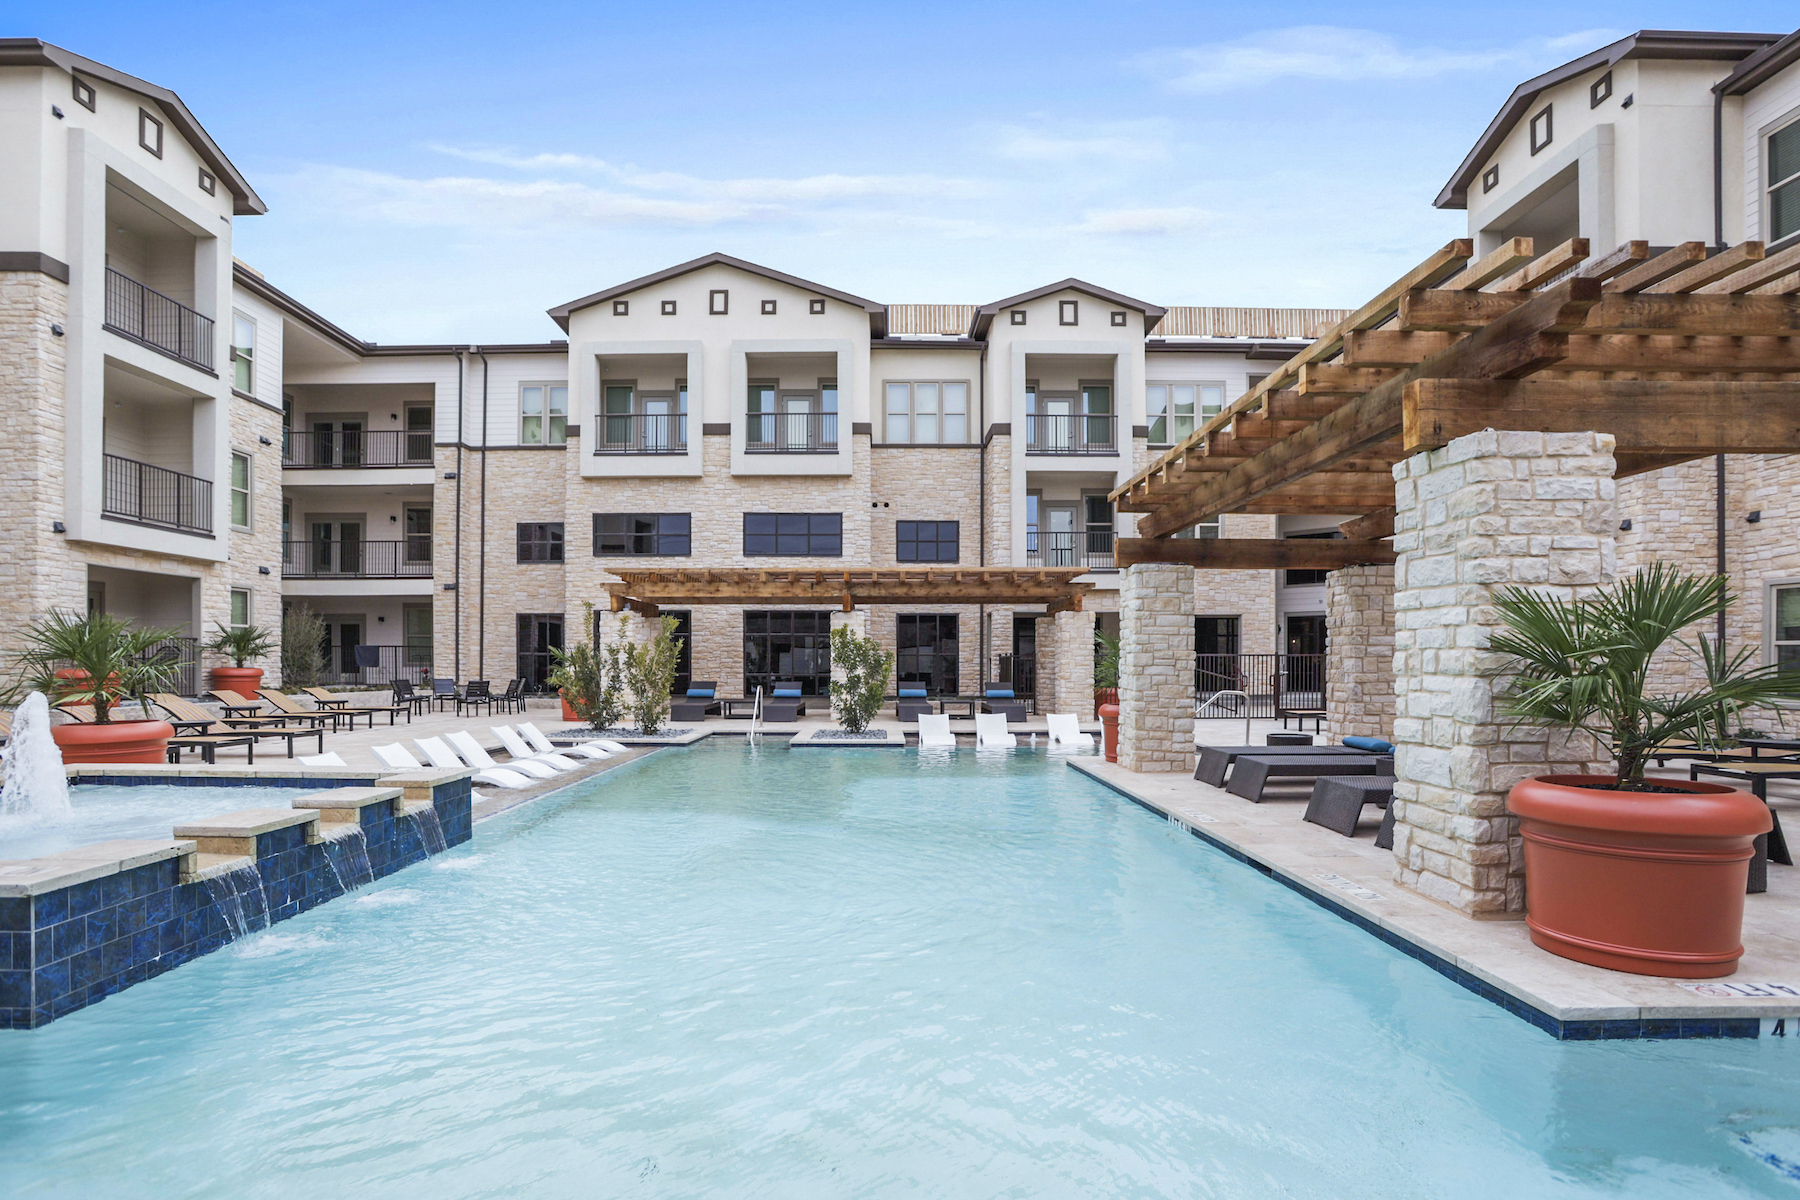 Monaco Apartments in Midland, Texas, designed by HEDK Architects,  Connect Structural, and Jordan & Skala Engineers, and built by BC Contracting. Photo: Brian Martin, Hommati